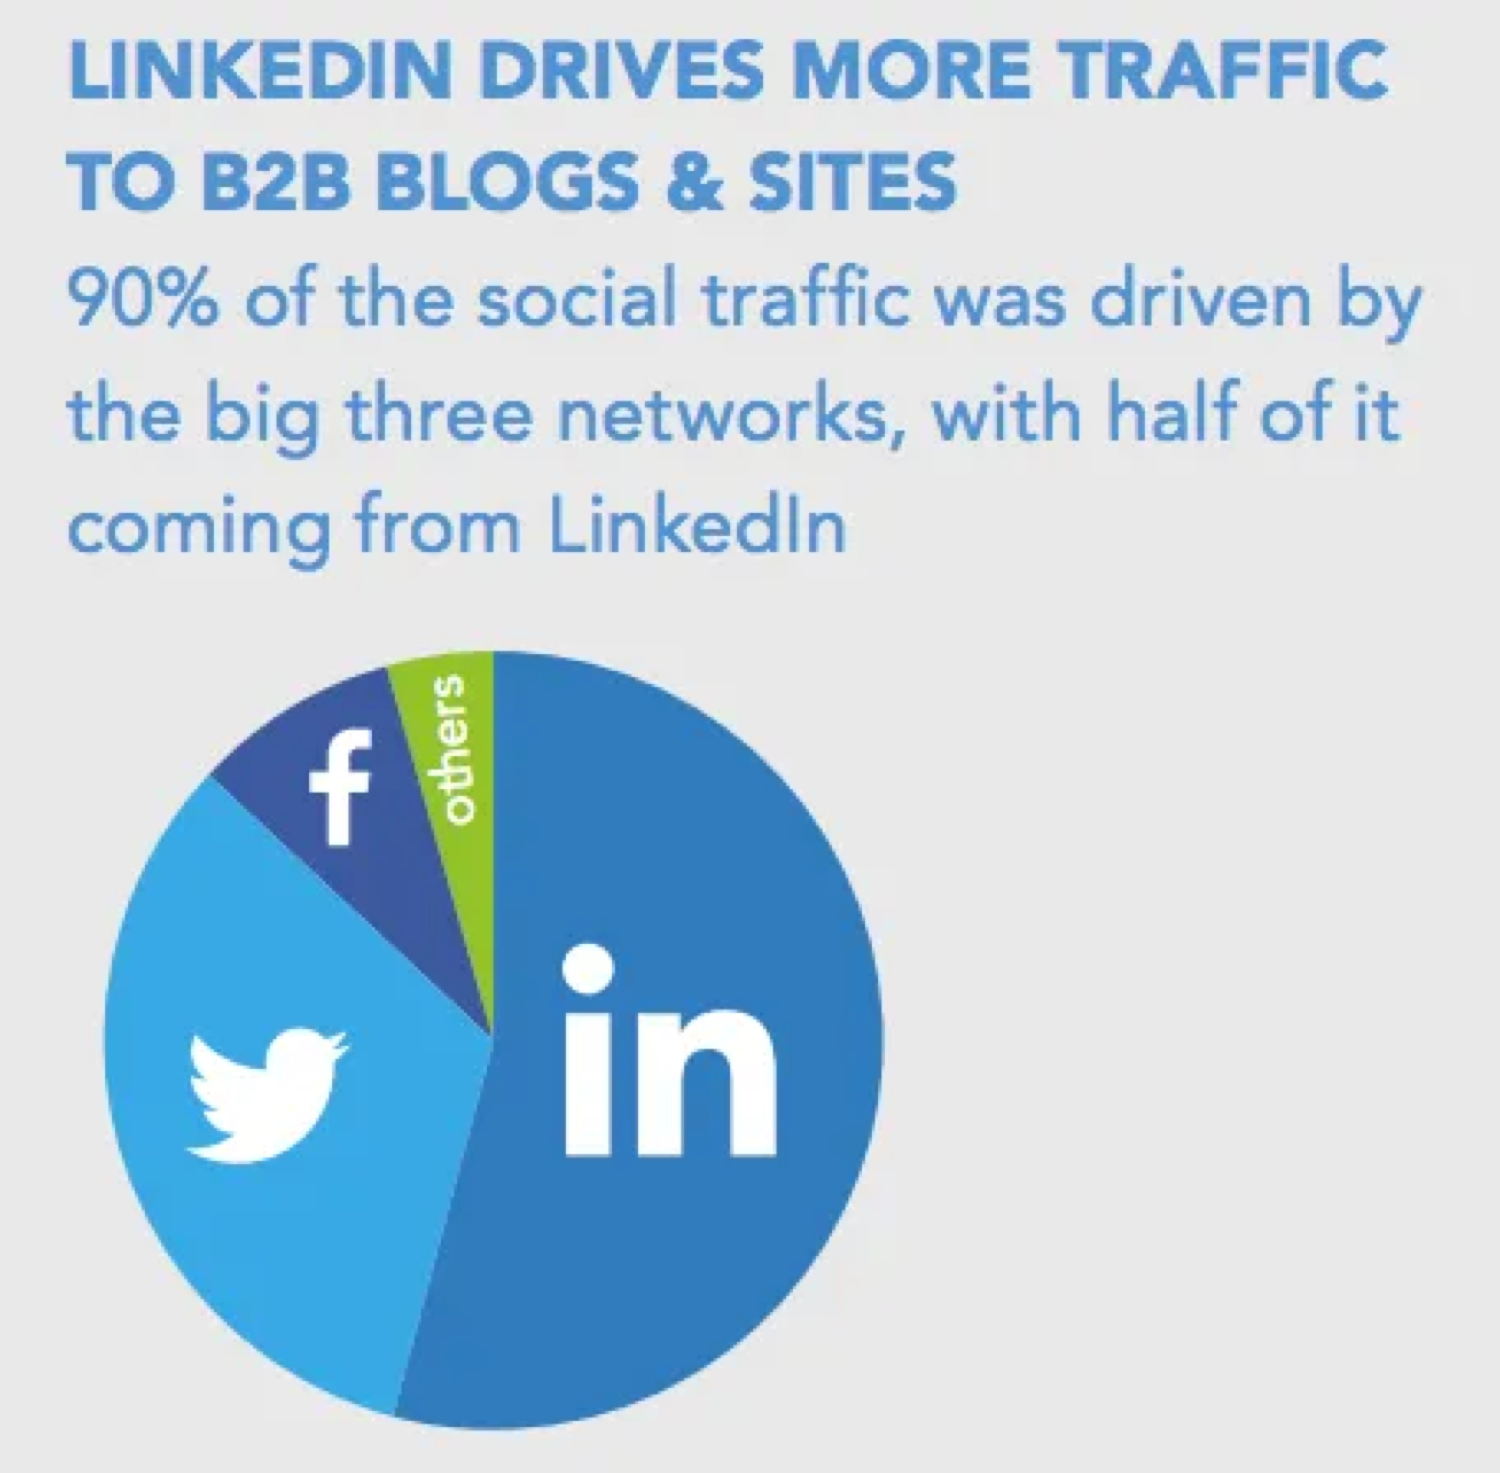 social traffic is driven by LinkedIn to B2B sites